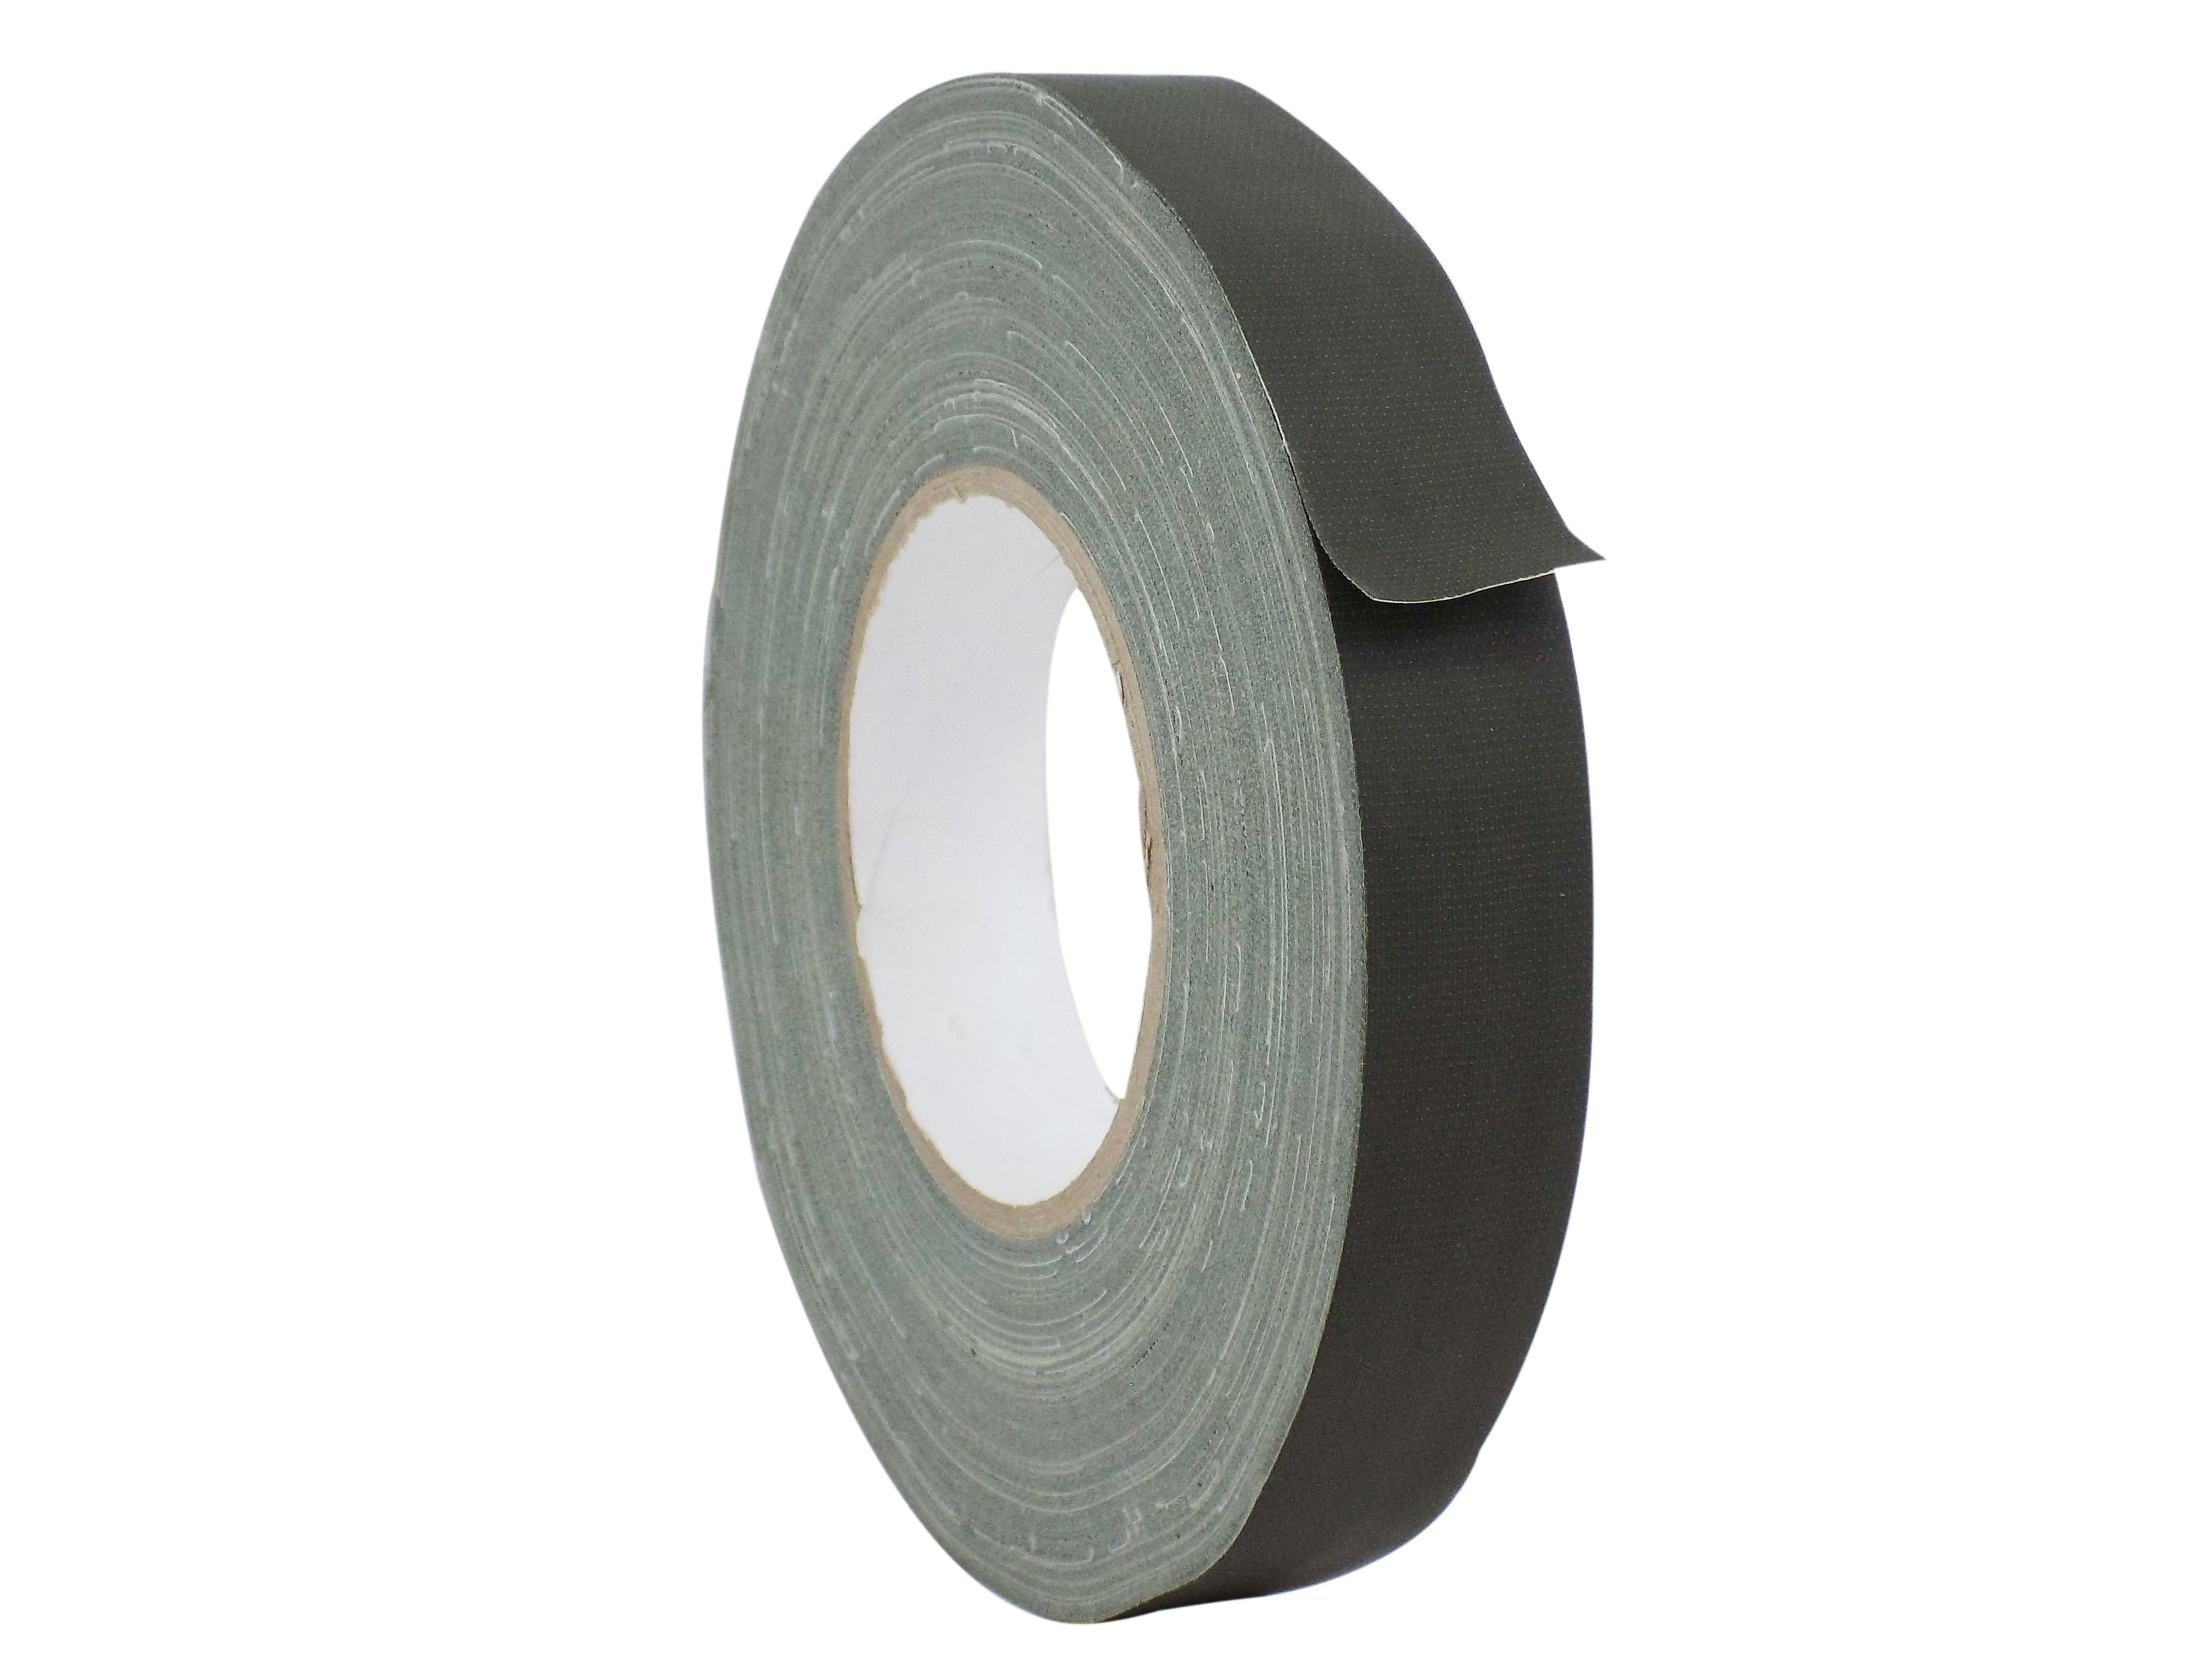 No Residue Strong LOW GLOSS FILM WOD Gaffer Olive Drab Tape 3 inch x 60 yards 